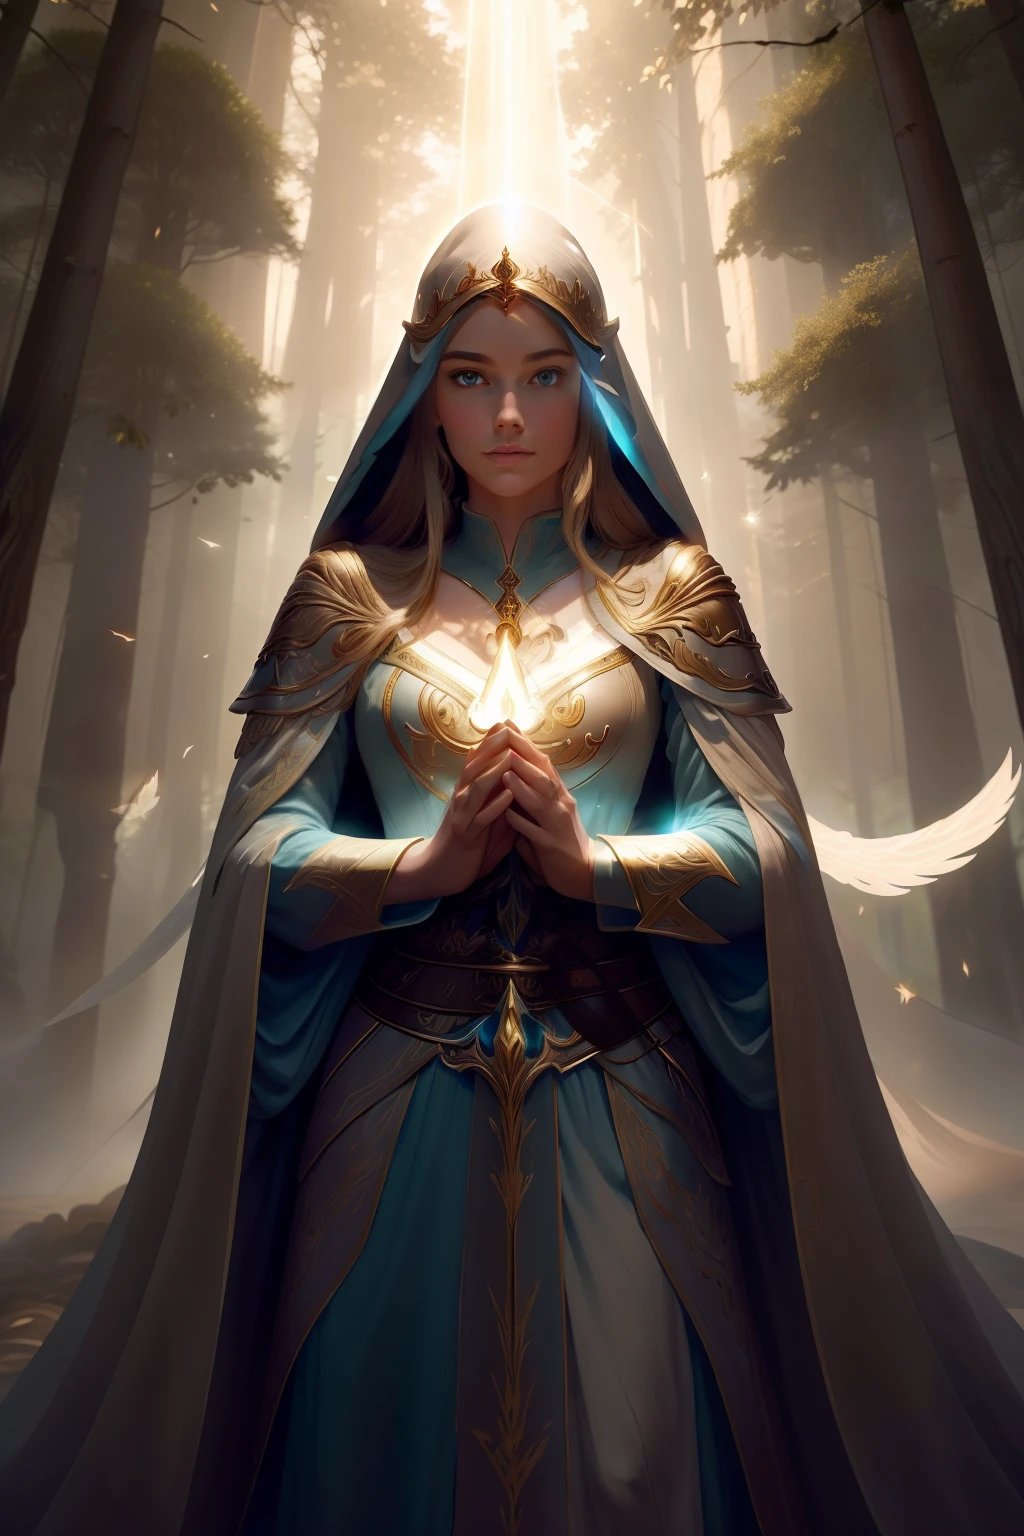 "Generates an image, 1 woman, full body, representing Seraphina Aelindë, a noble knight hospitaler of the Order of Saint John of Jerusalem and an elf of profound beauty. In the image, Seraphina is standing standing in an ancient Forest, surrounded by tall and mysterious trees. Her long, luminous brown hair falls in intricate braids over her shoulders, with golden sparkles that magically capture the light. Her eyes of an intense and heavenly blue look with compassion and determination towards the horizon. He wears a black robe with a white pate cross on the left chest, and a black hooded cloak billowing slightly in the forest breeze. His hands gracefully hold the hilt of a sword, symbolizing his bravery and commitment with protection. The image captures Seraphina's serene and noble presence, as she radiates a deep connection to nature and the magic that surrounds her."